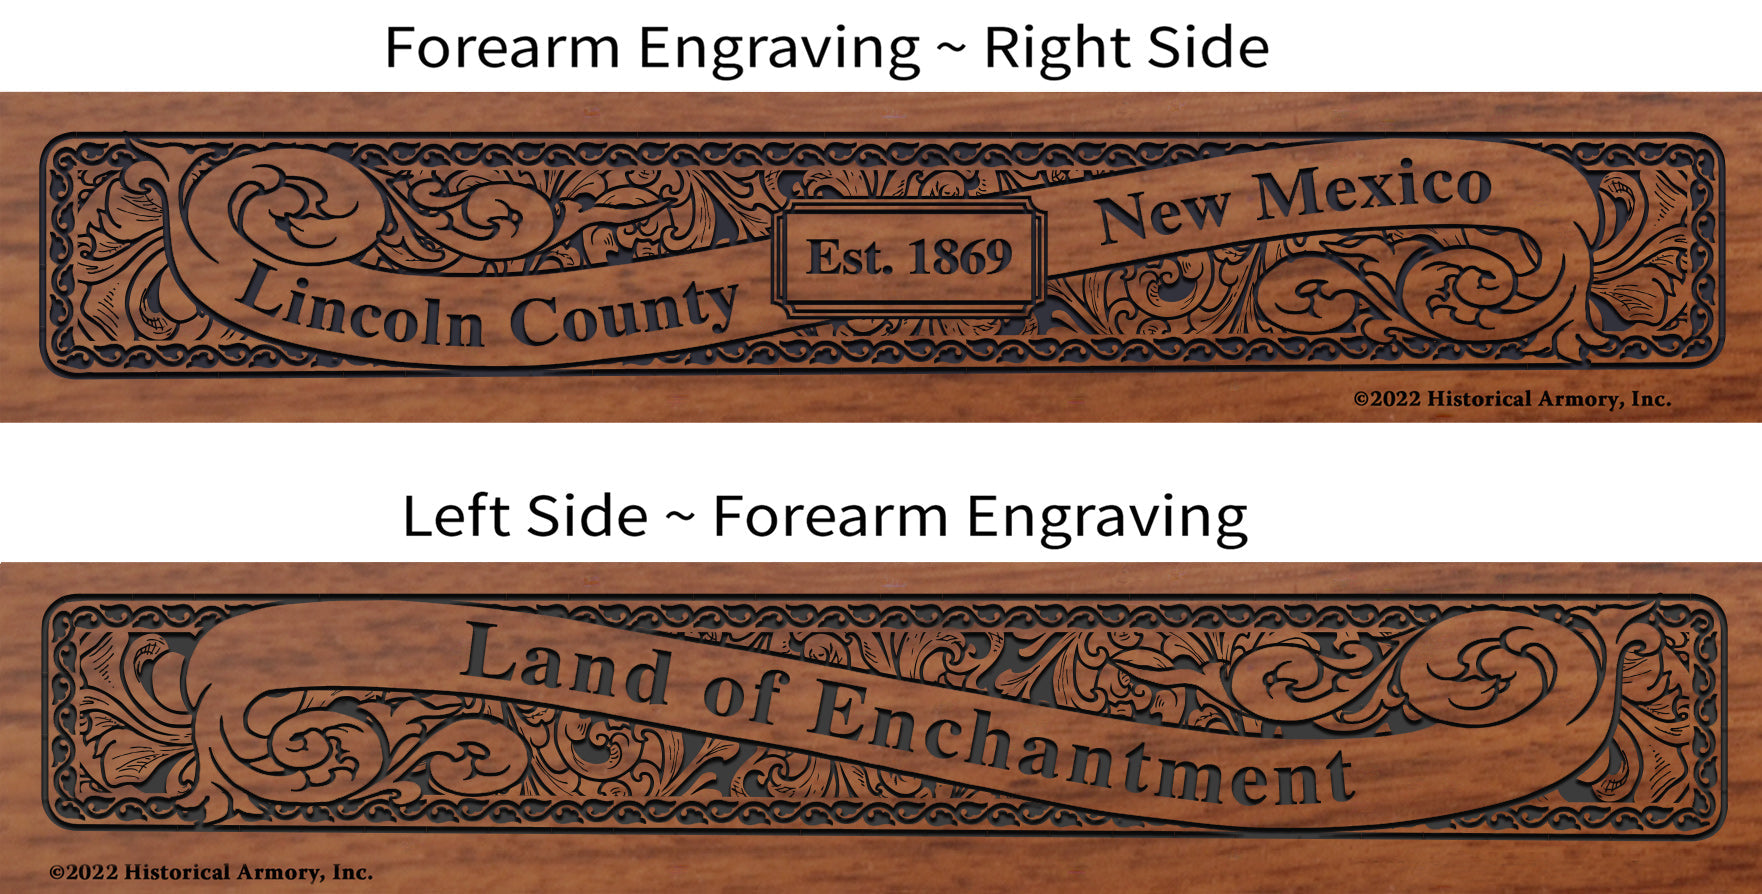 Lincoln County New Mexico Engraved Rifle Forearm